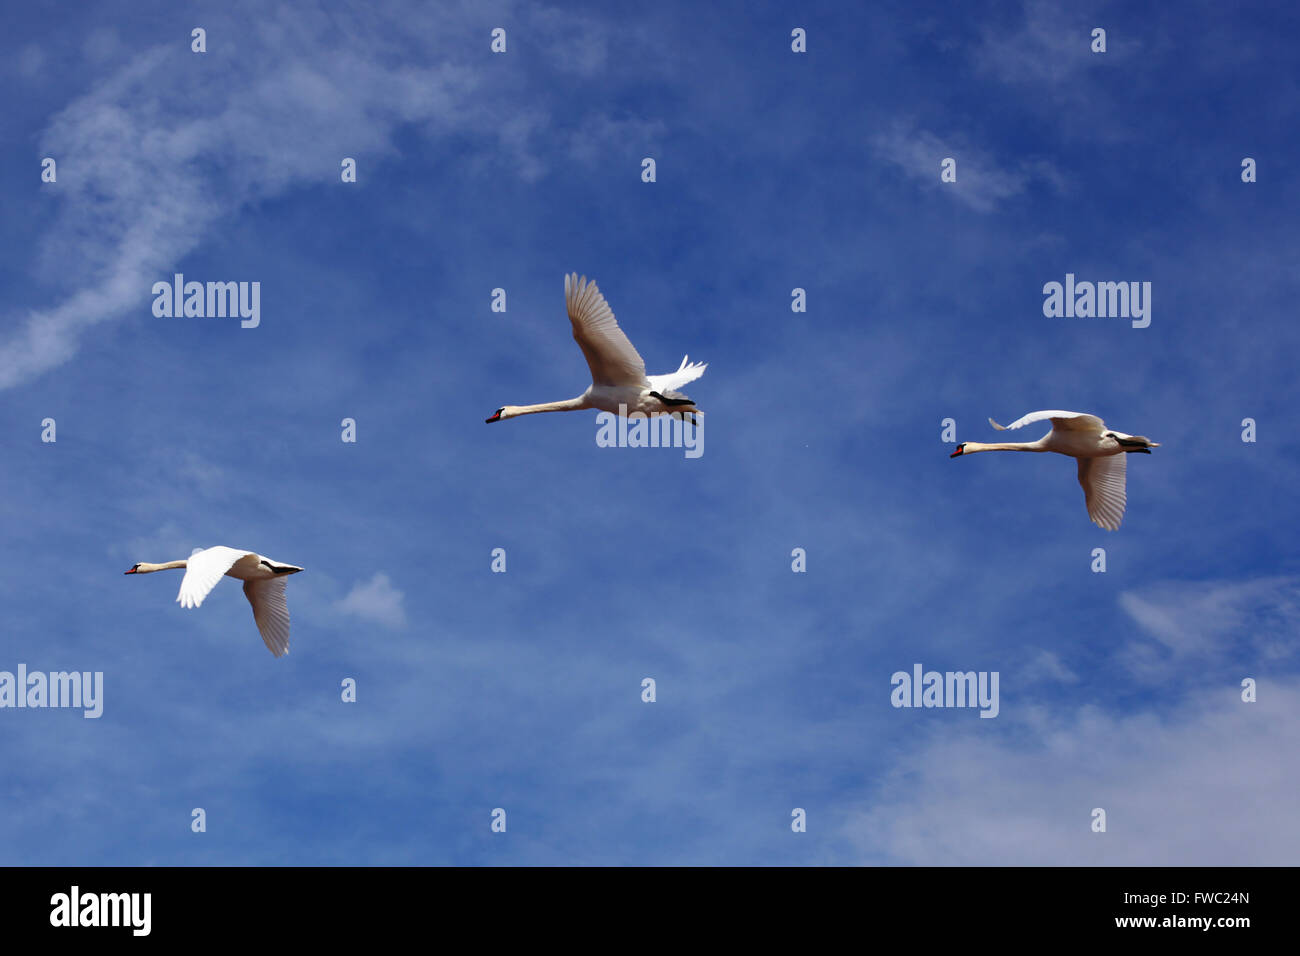 Three beautyful white swans flying in a blue light cloudy sky. Symbol of Nordic cooperation. Stock Photo